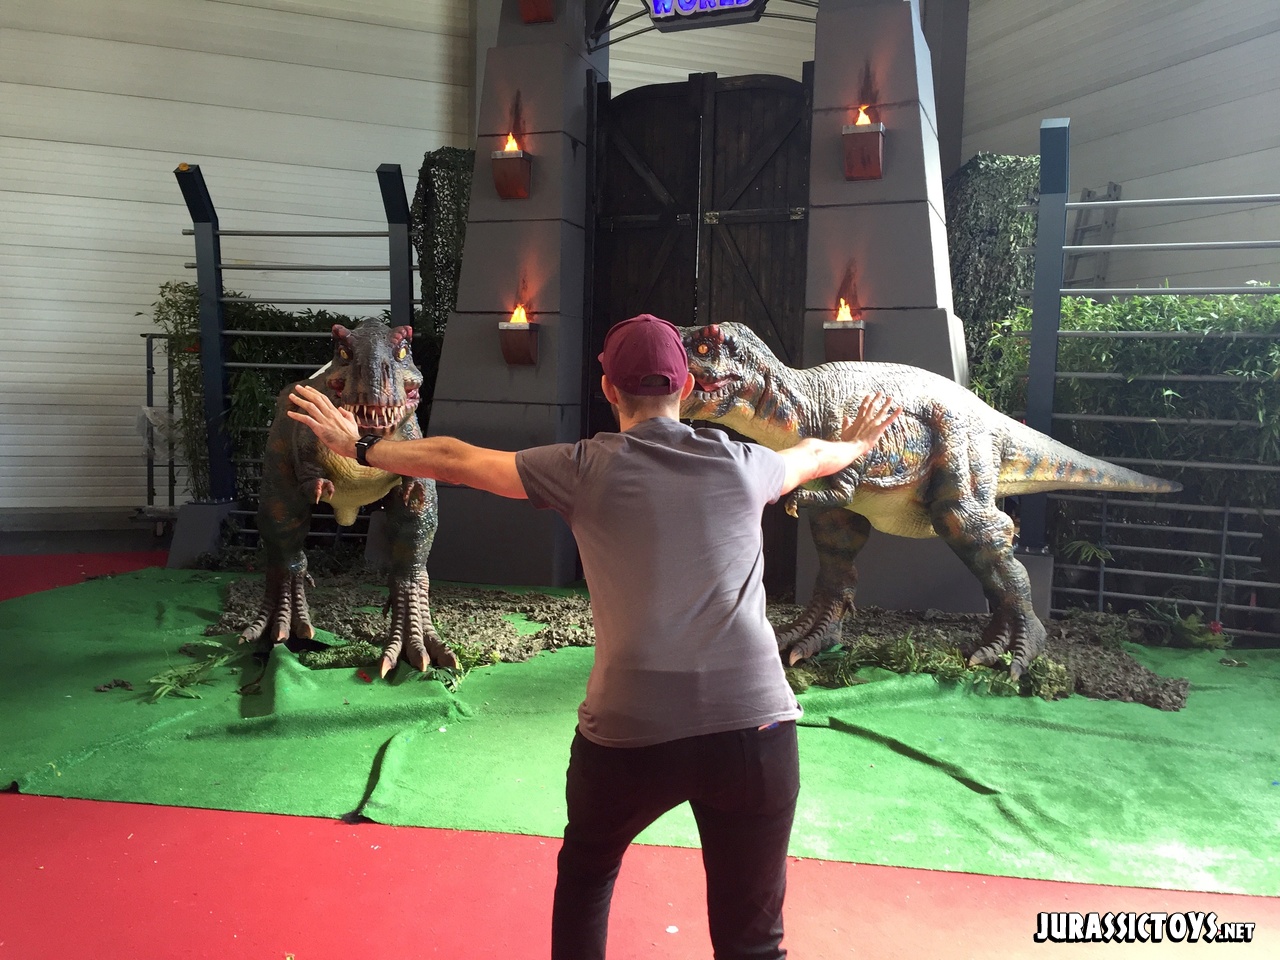 Pratting at the Jurassic World gate at FACTS convention